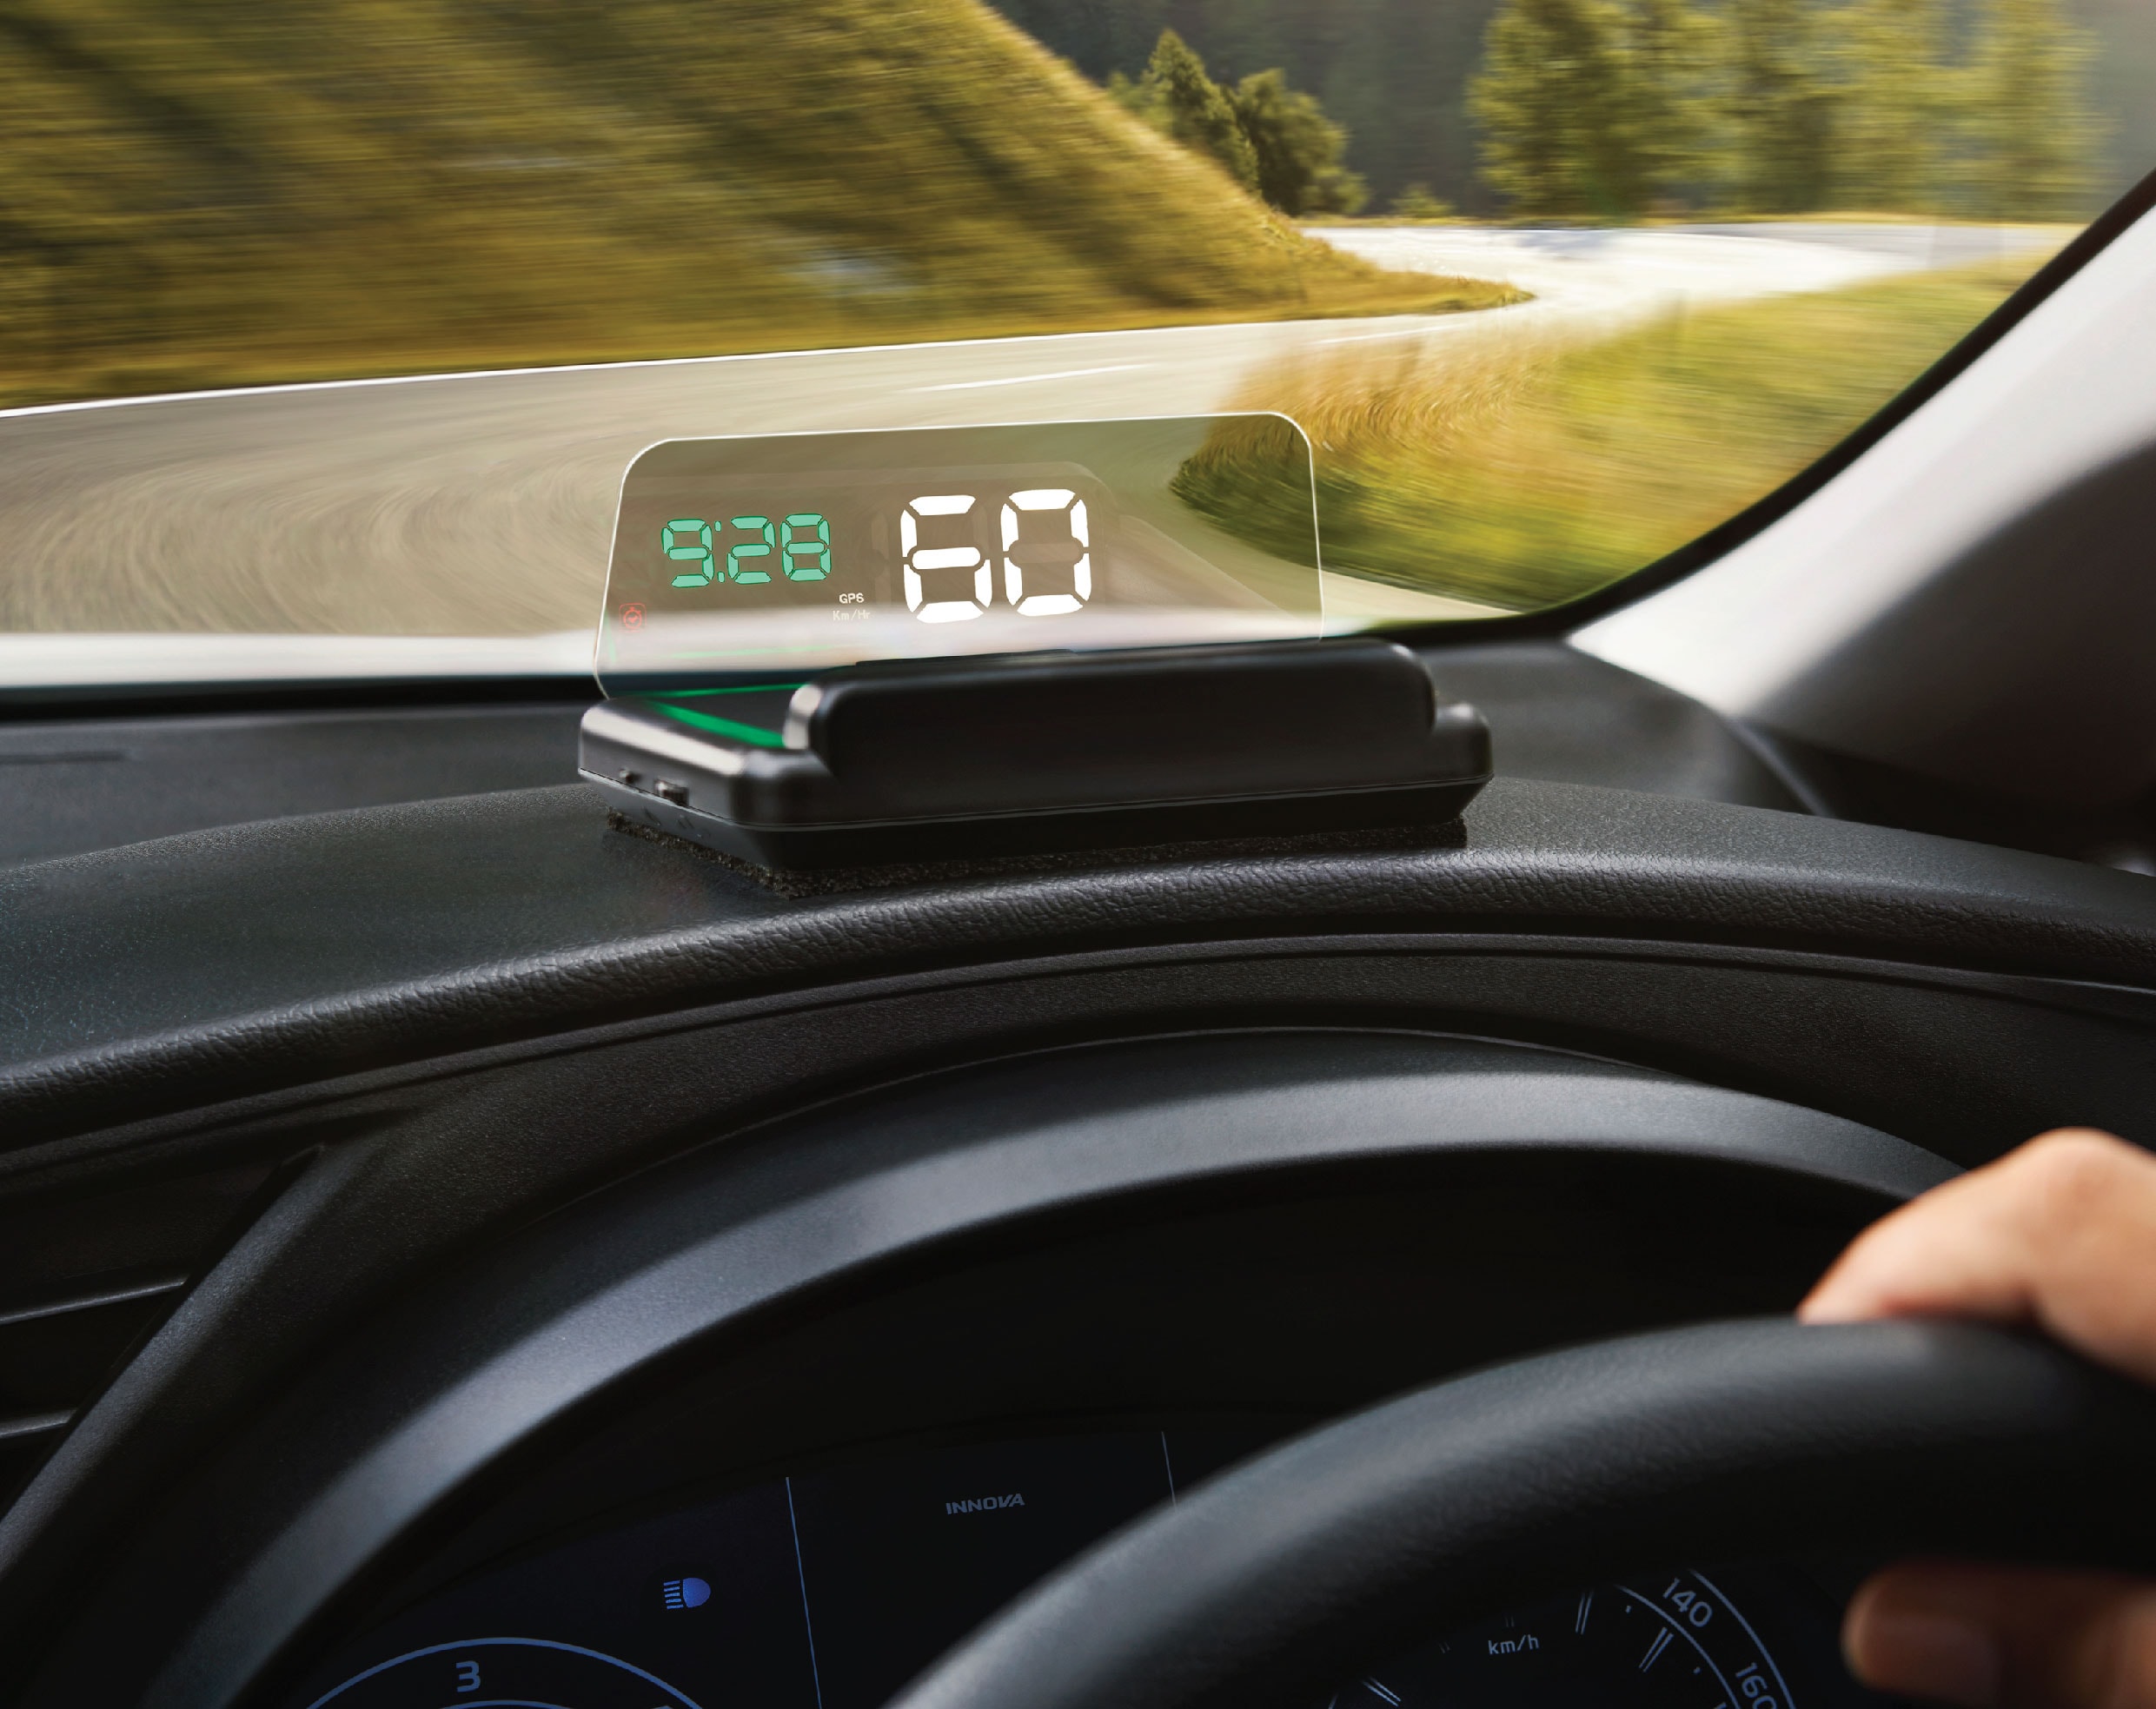 The new Toyota Innova also gets a Head-Up Display (HUD). 